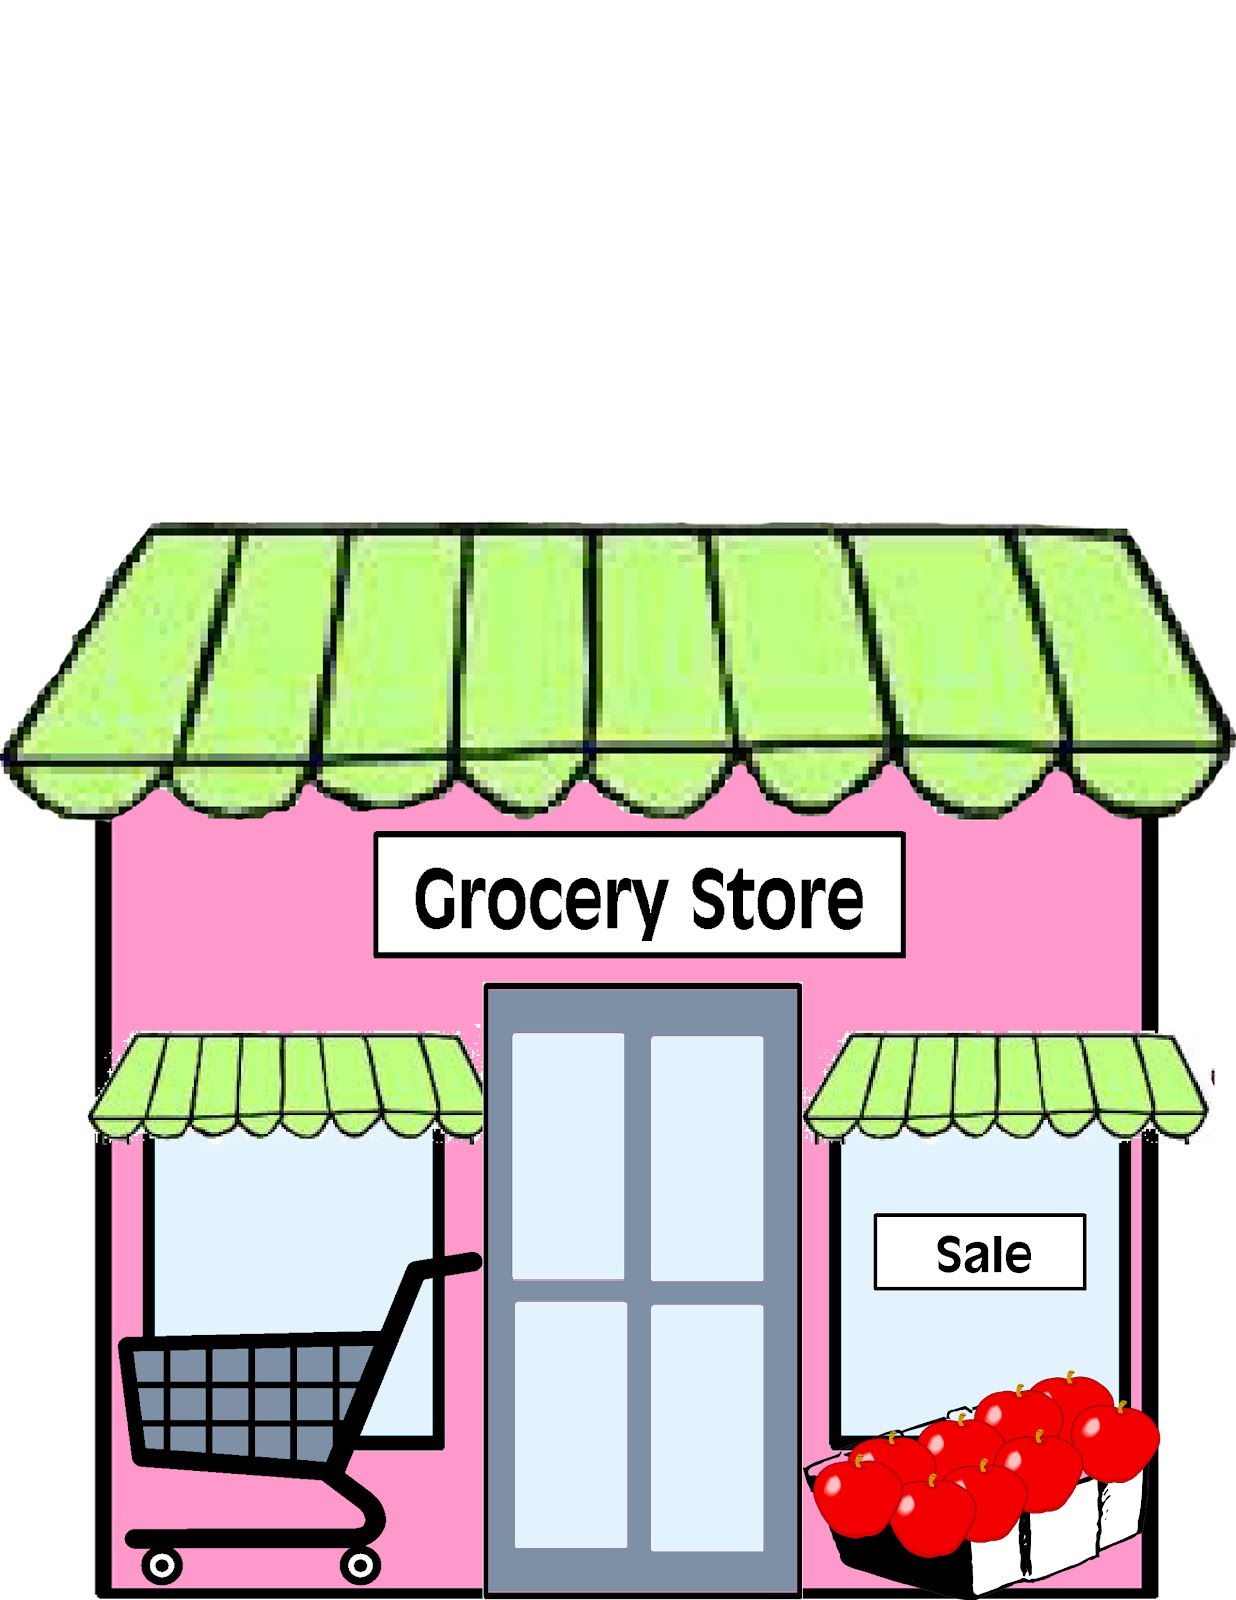 Grocery Store Building Clipart - ClipArt Best